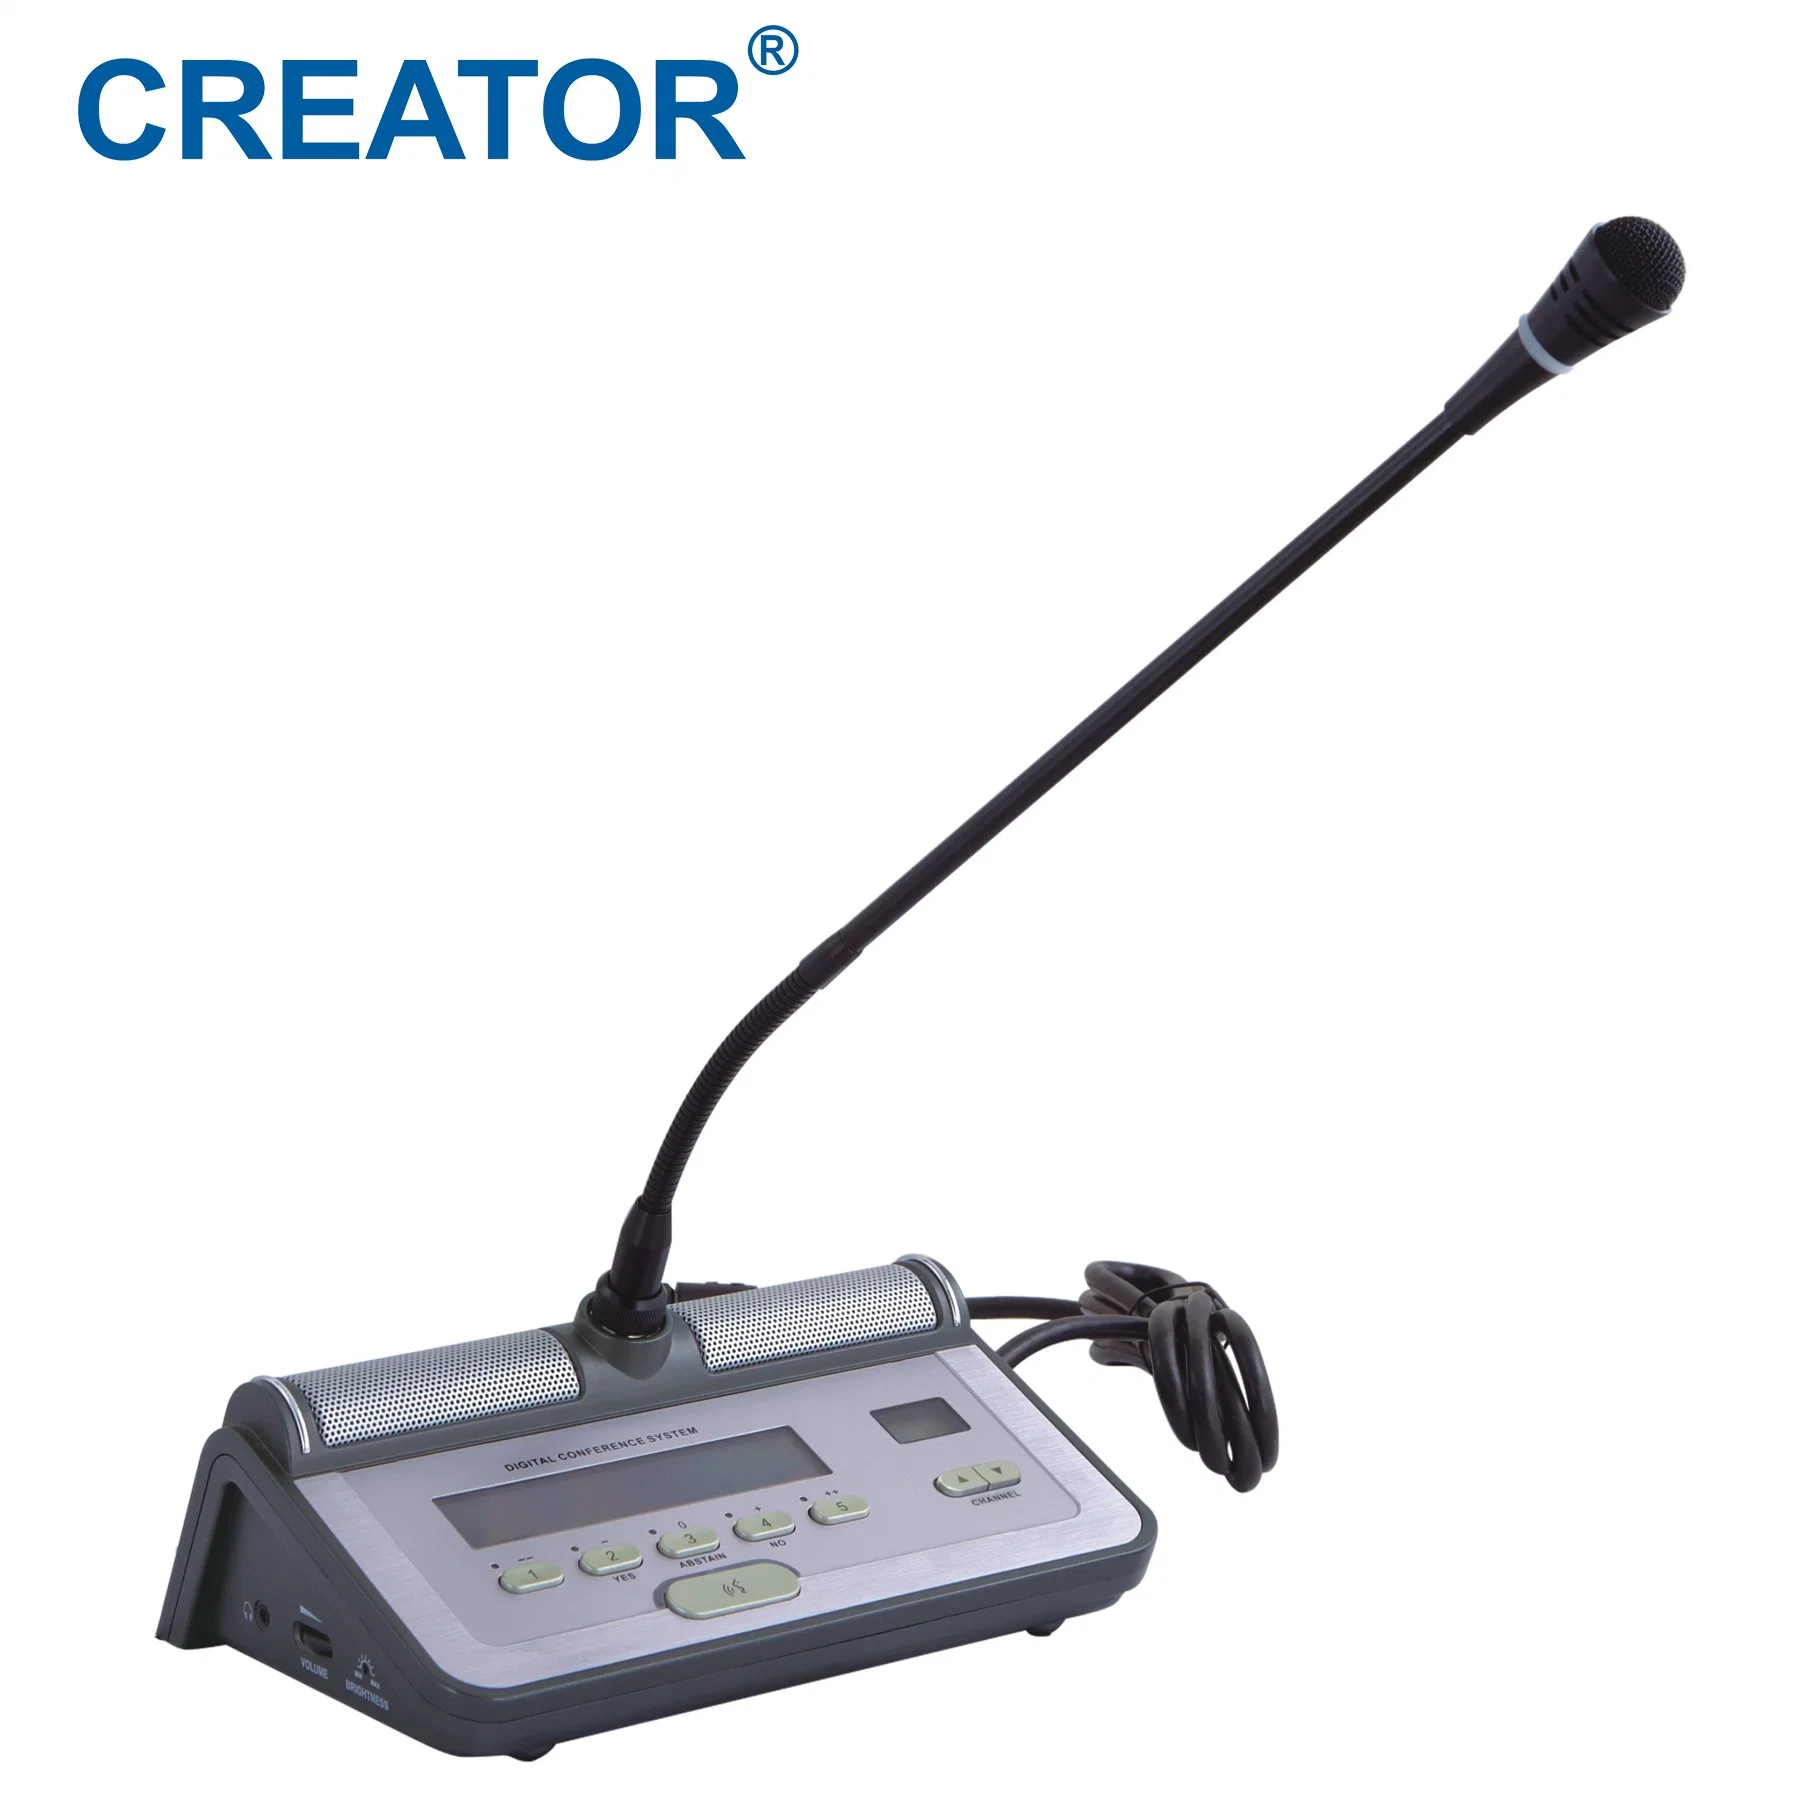 Discussion & Voting Conference Room Audio System Microphone with Nameplate Display